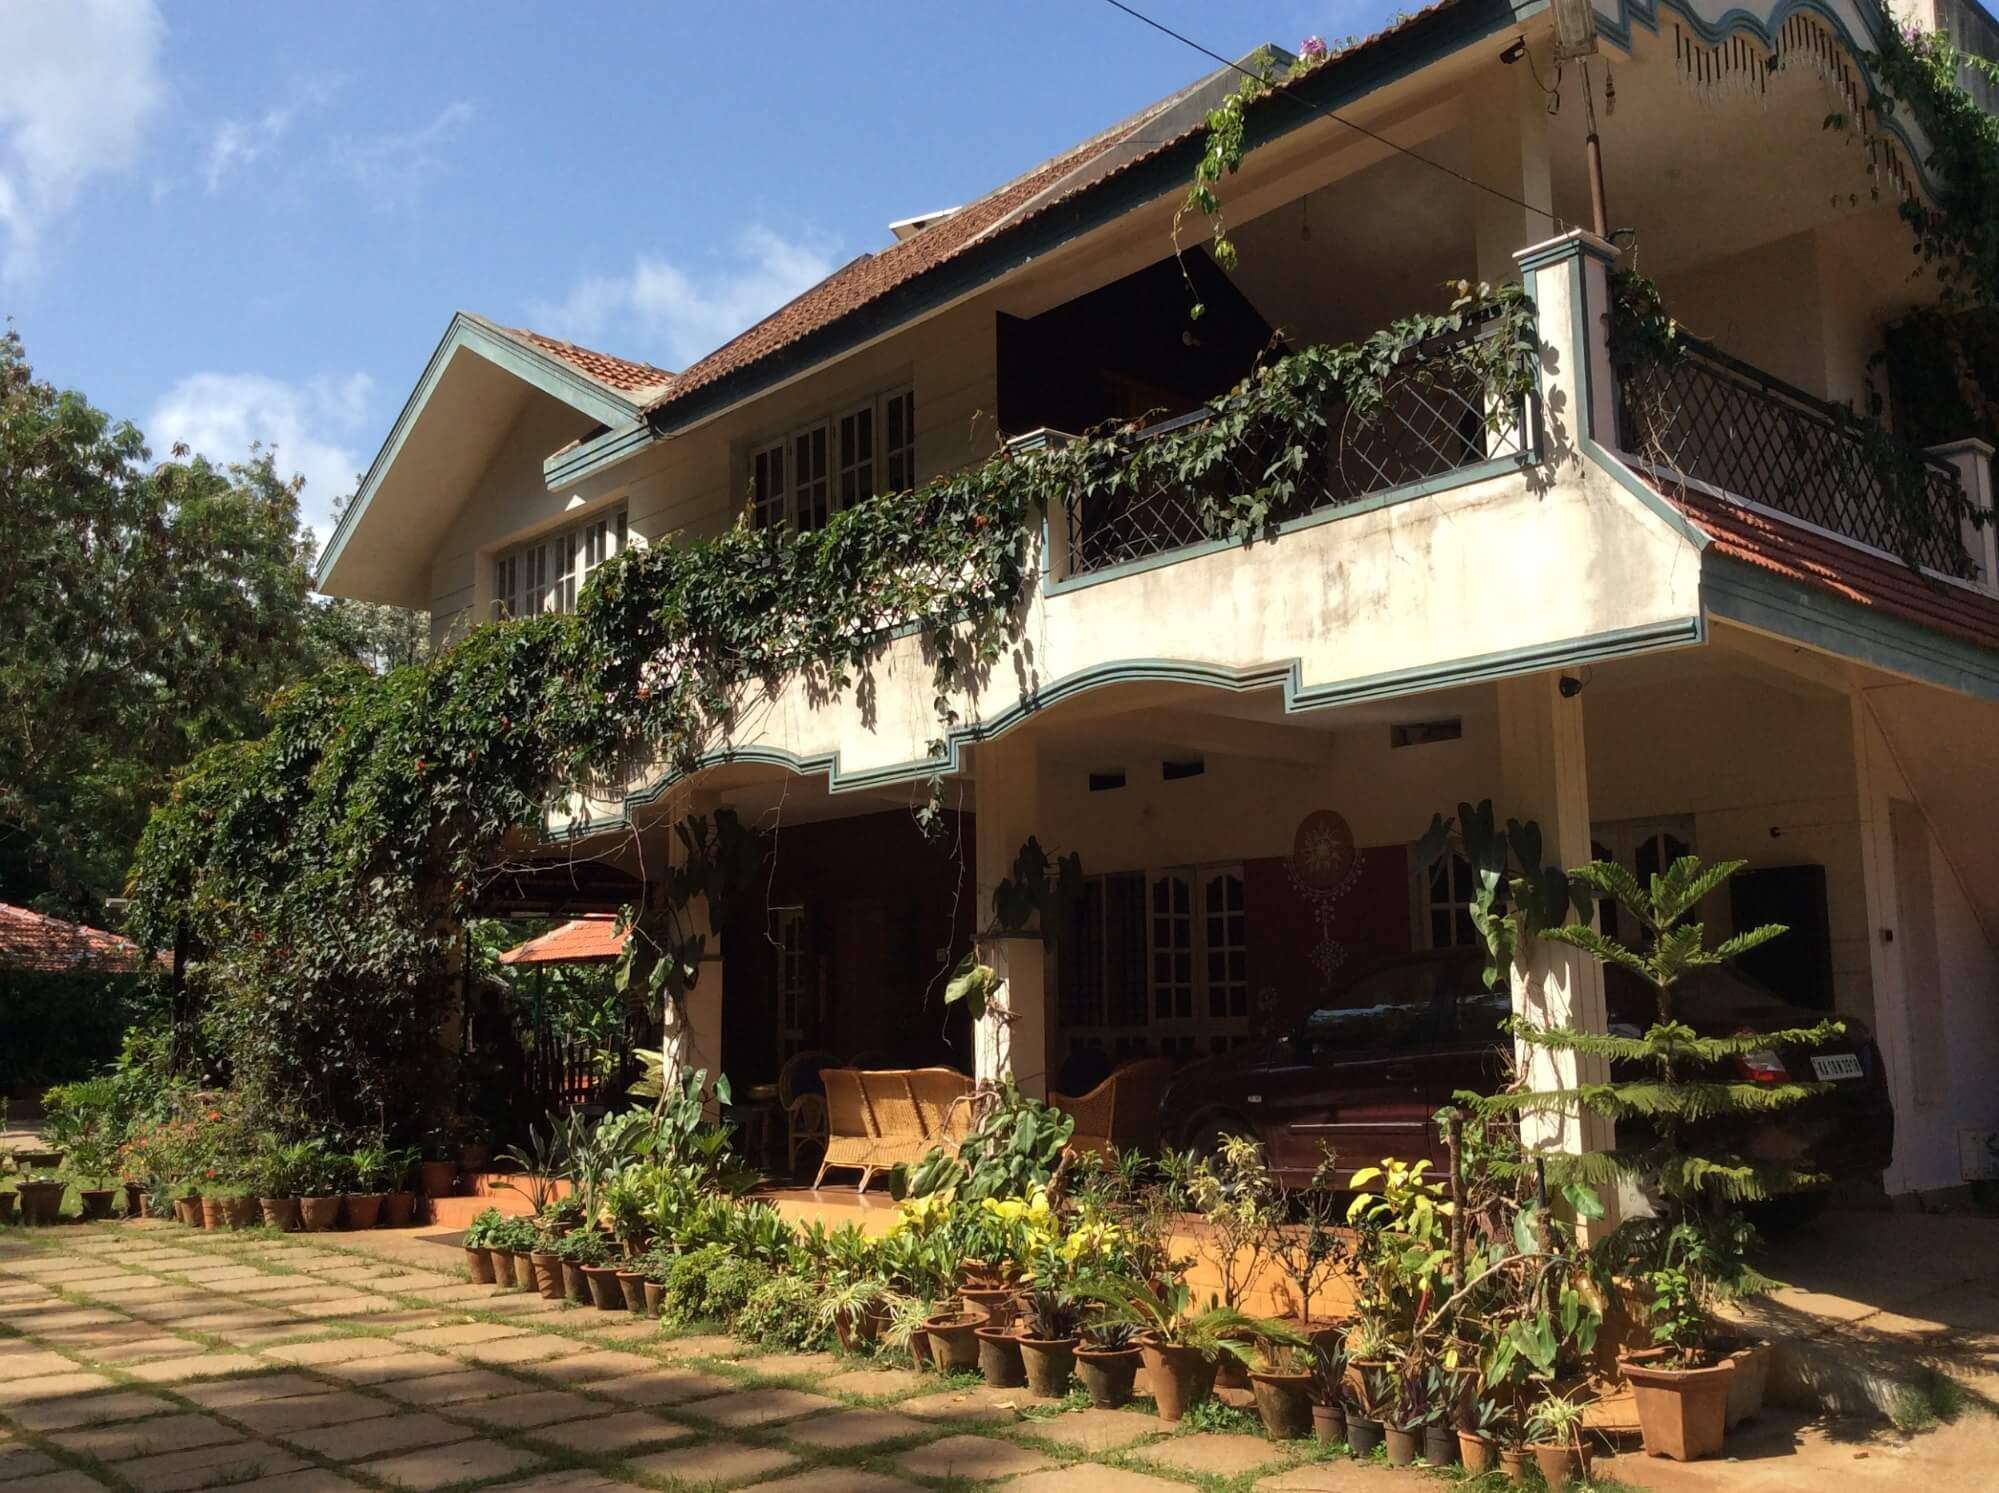 Devigiri Homestay is one of the best budget homestays in Chikmagalur